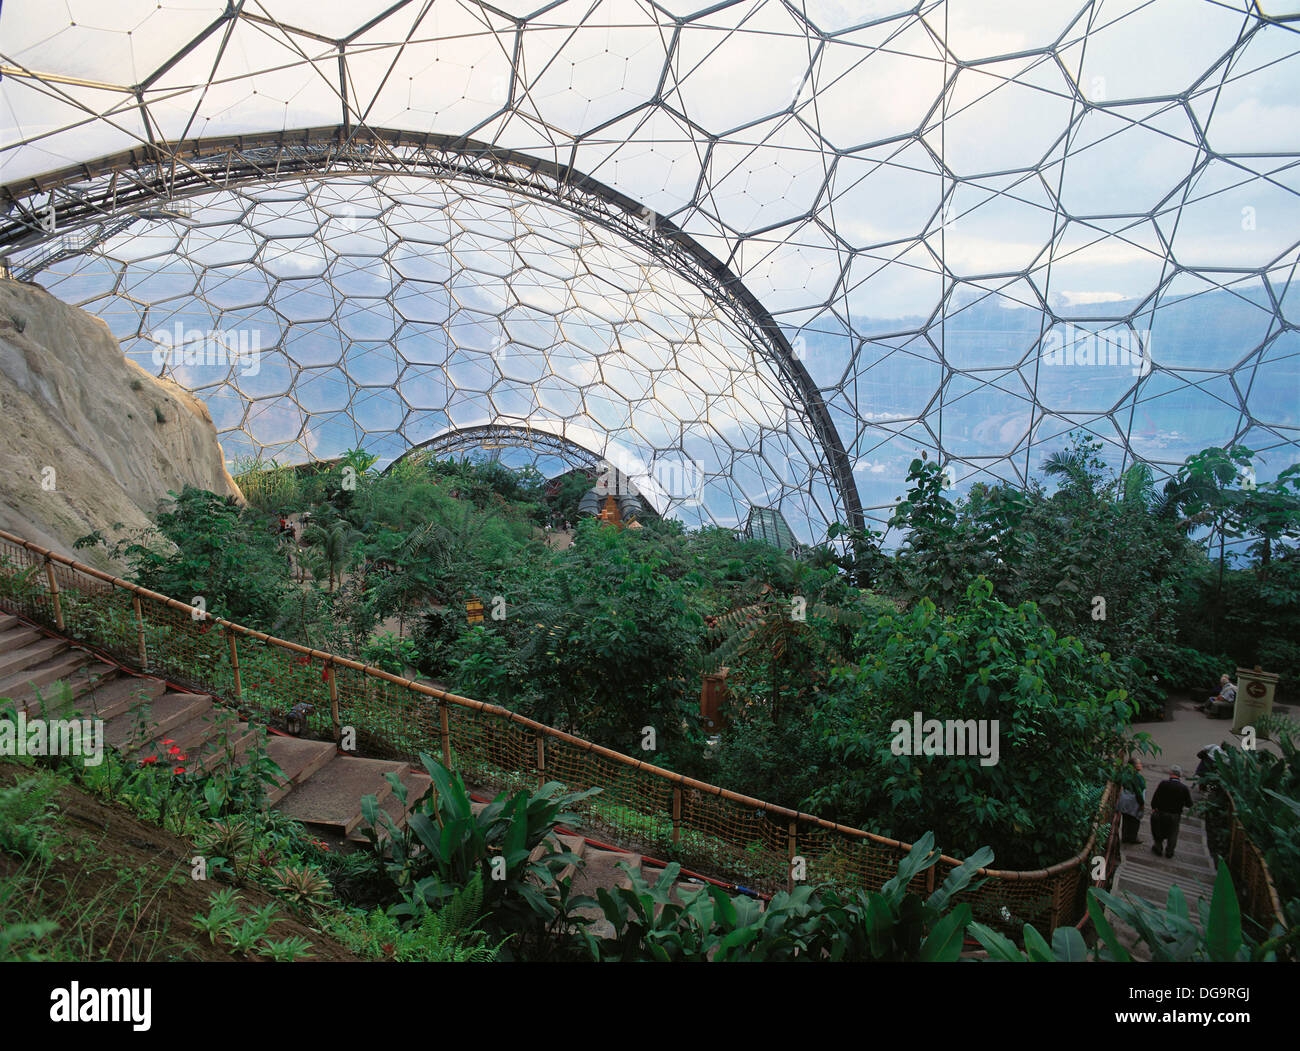 Biome des zones tropicales humides. Eden Project. Cornwall. L'Angleterre Banque D'Images